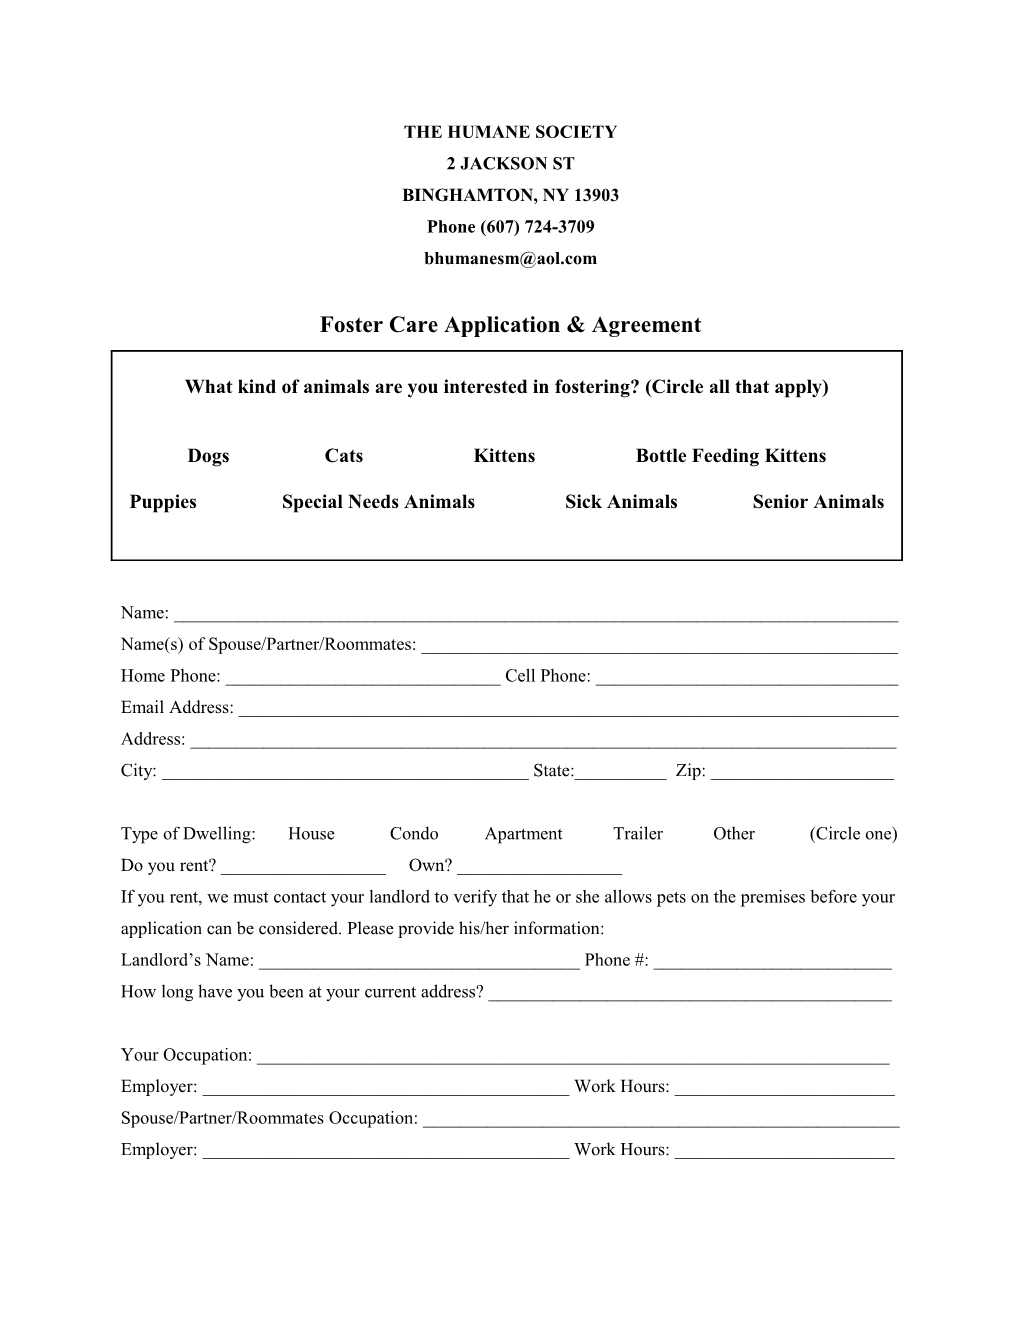 Foster Care Application & Agreement